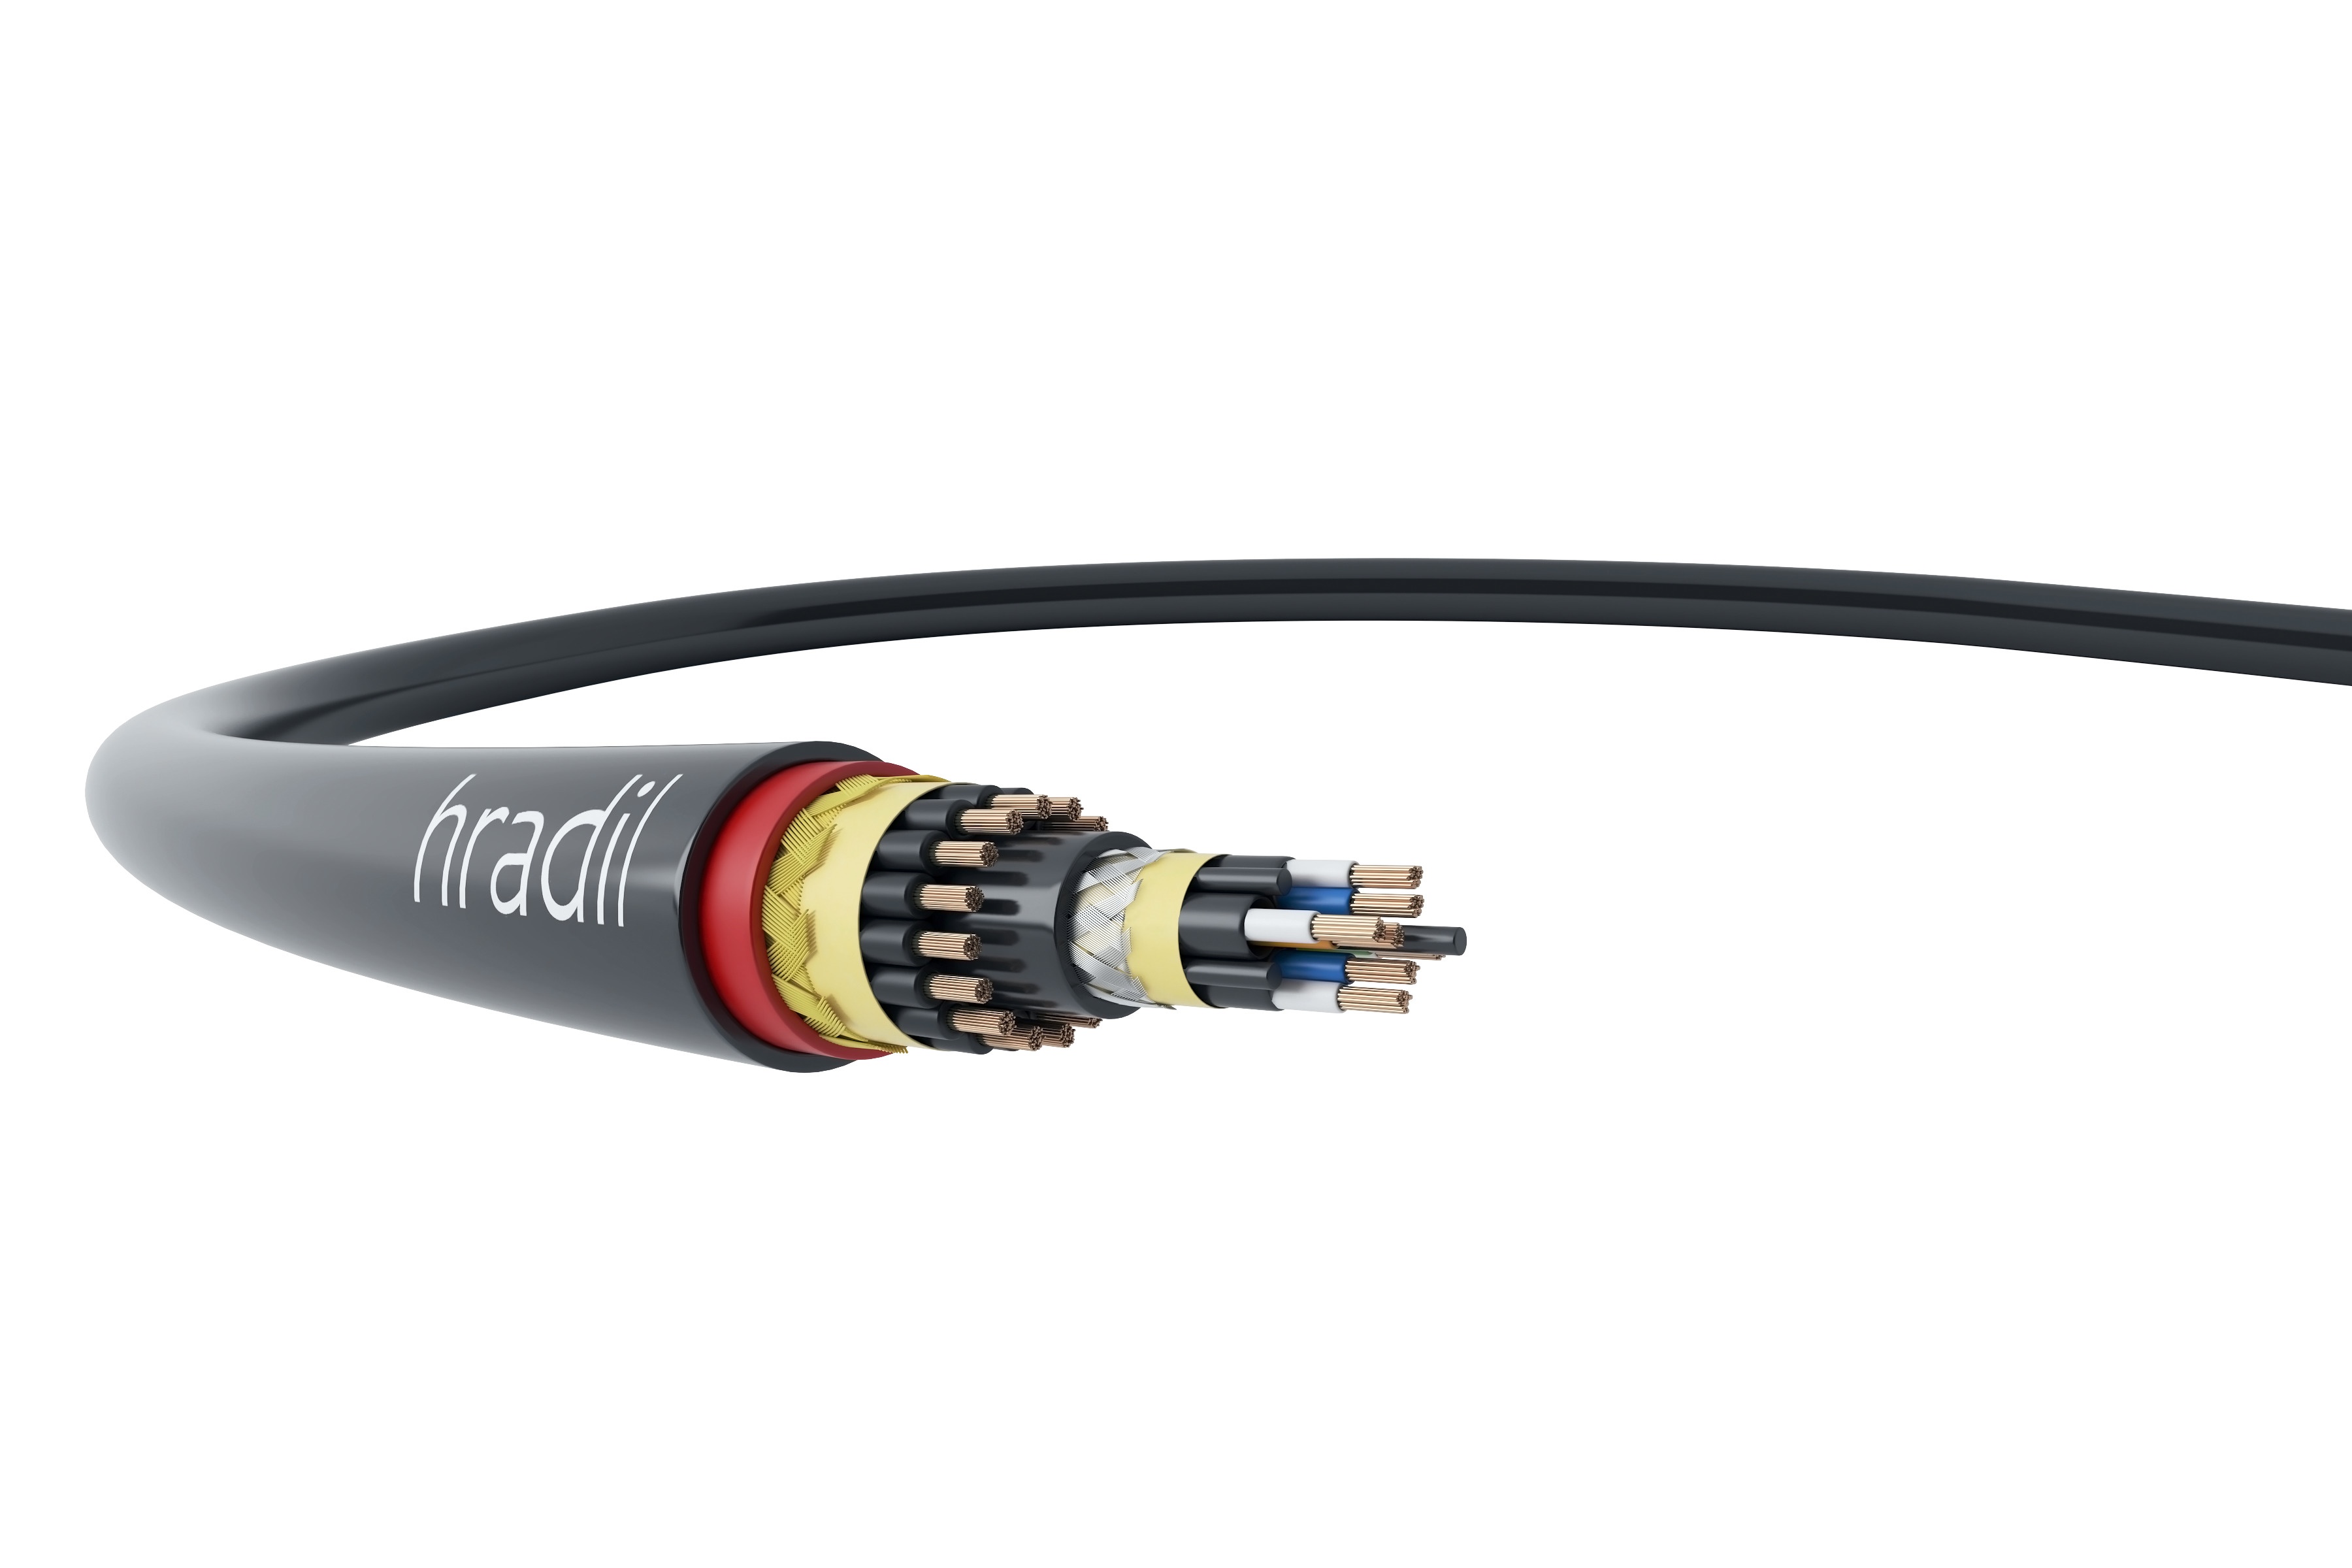 The Hradil high-endurance cable: no need to have two separate cables anymore to transmit data and power - instead the cable combines both tasks in a single connection cable from railcar to railcar.